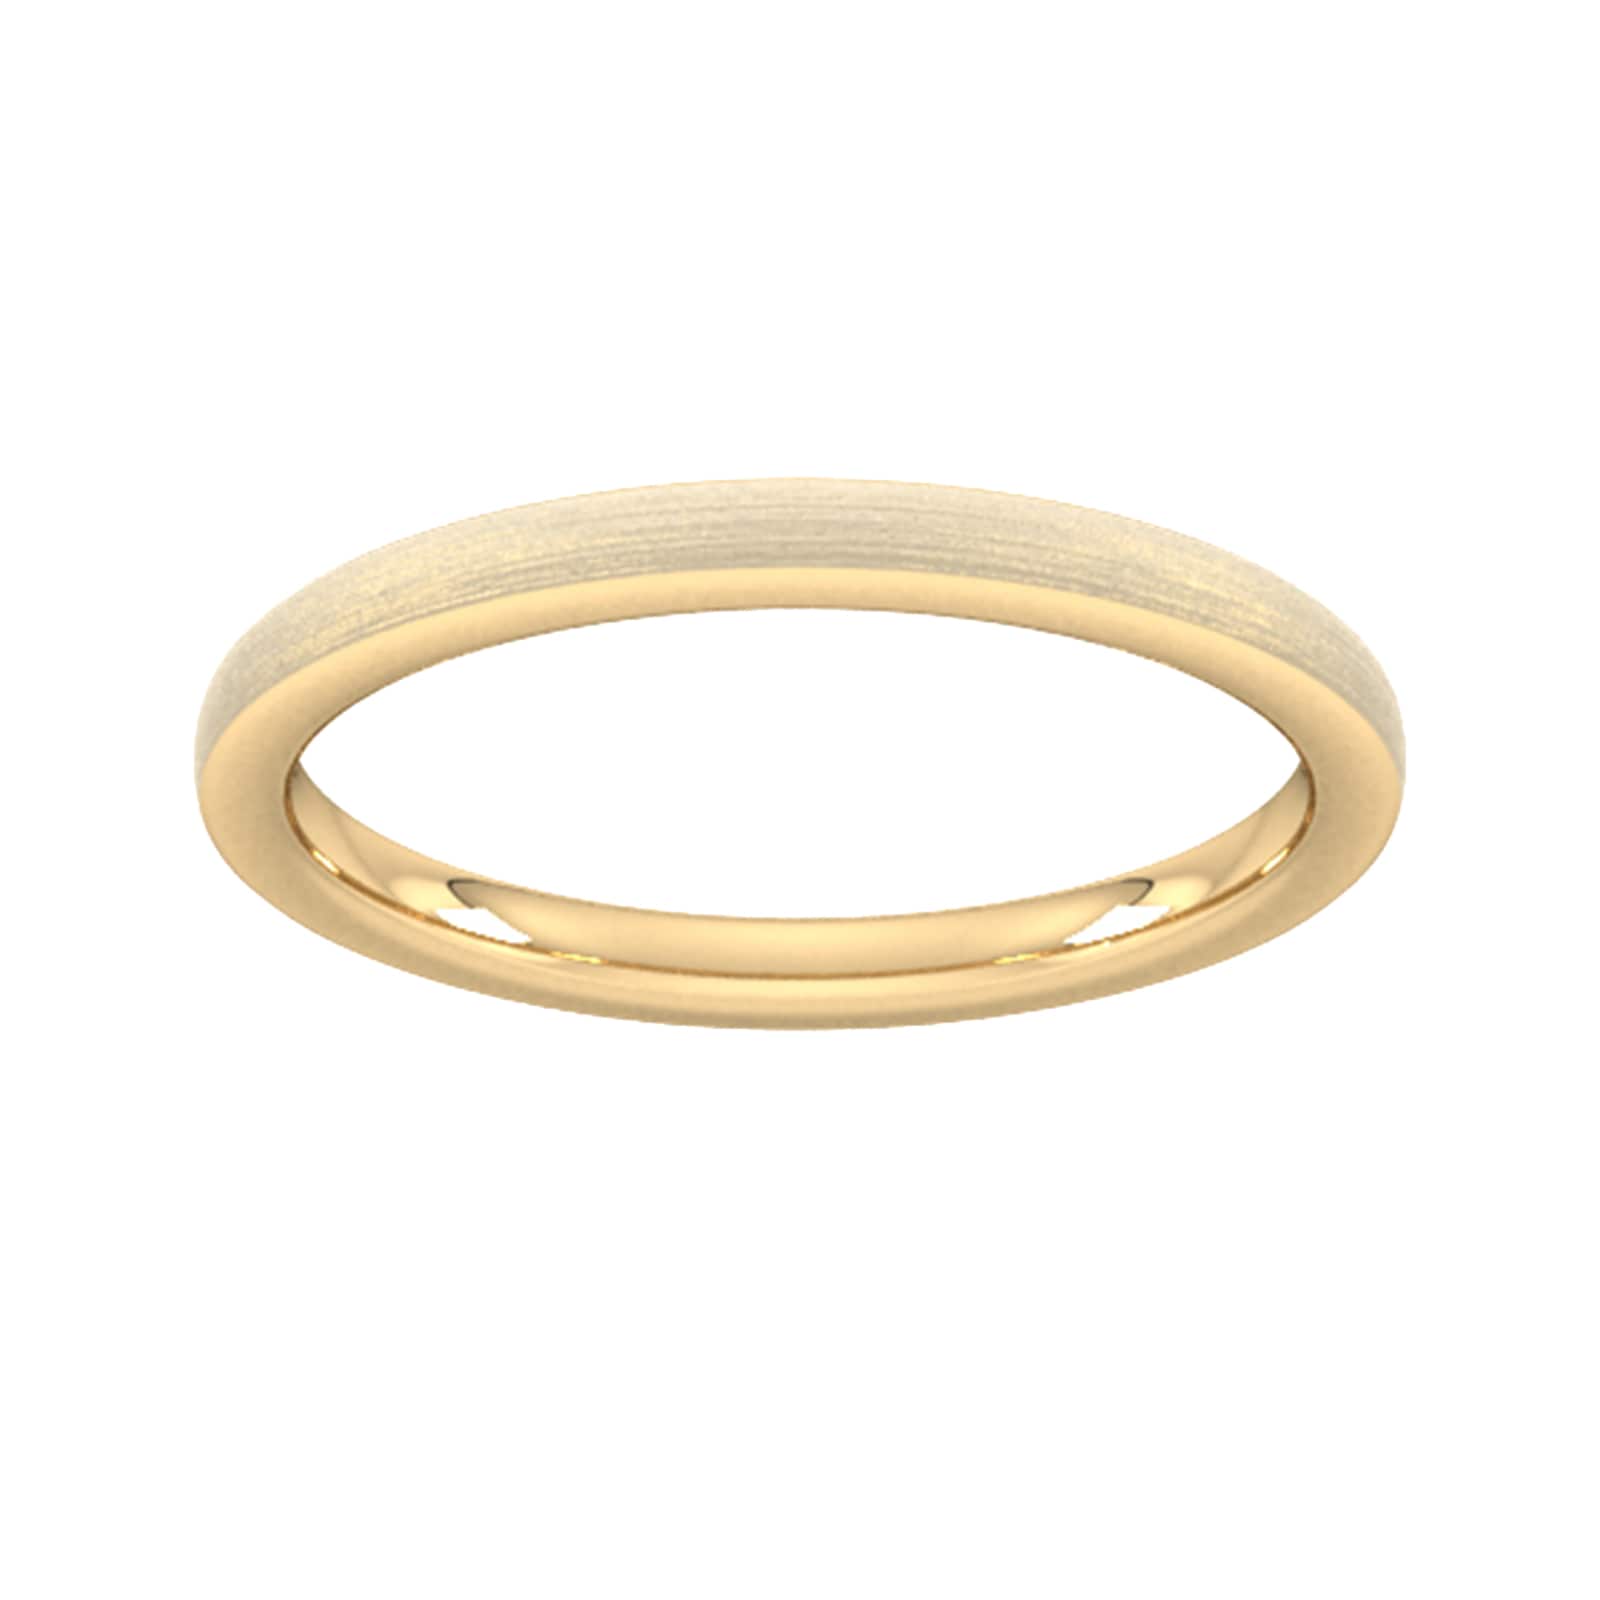 2mm Slight Court Heavy Polished Chamfered Edges With Matt Centre Wedding Ring In 18 Carat Yellow Gold - Ring Size Q